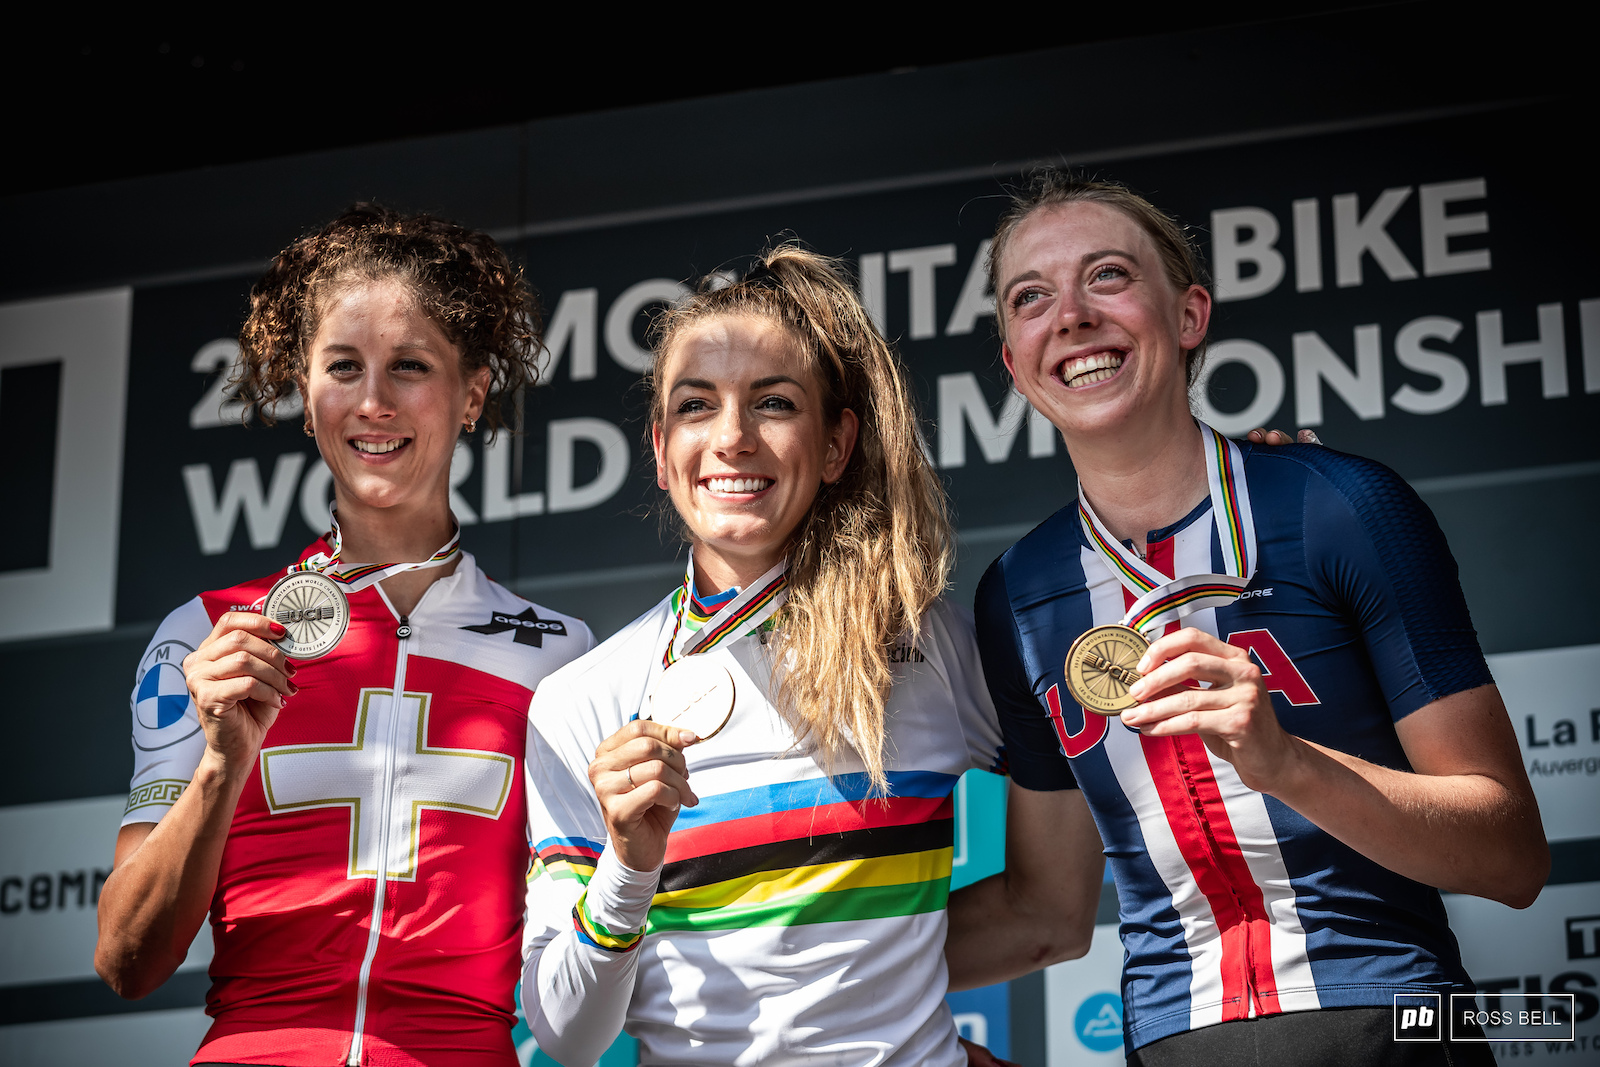 Pauline Ferrand Prevot adds another gold medal to her collection as Jolanda Neff picks up silver and Haley Batten the bronze.